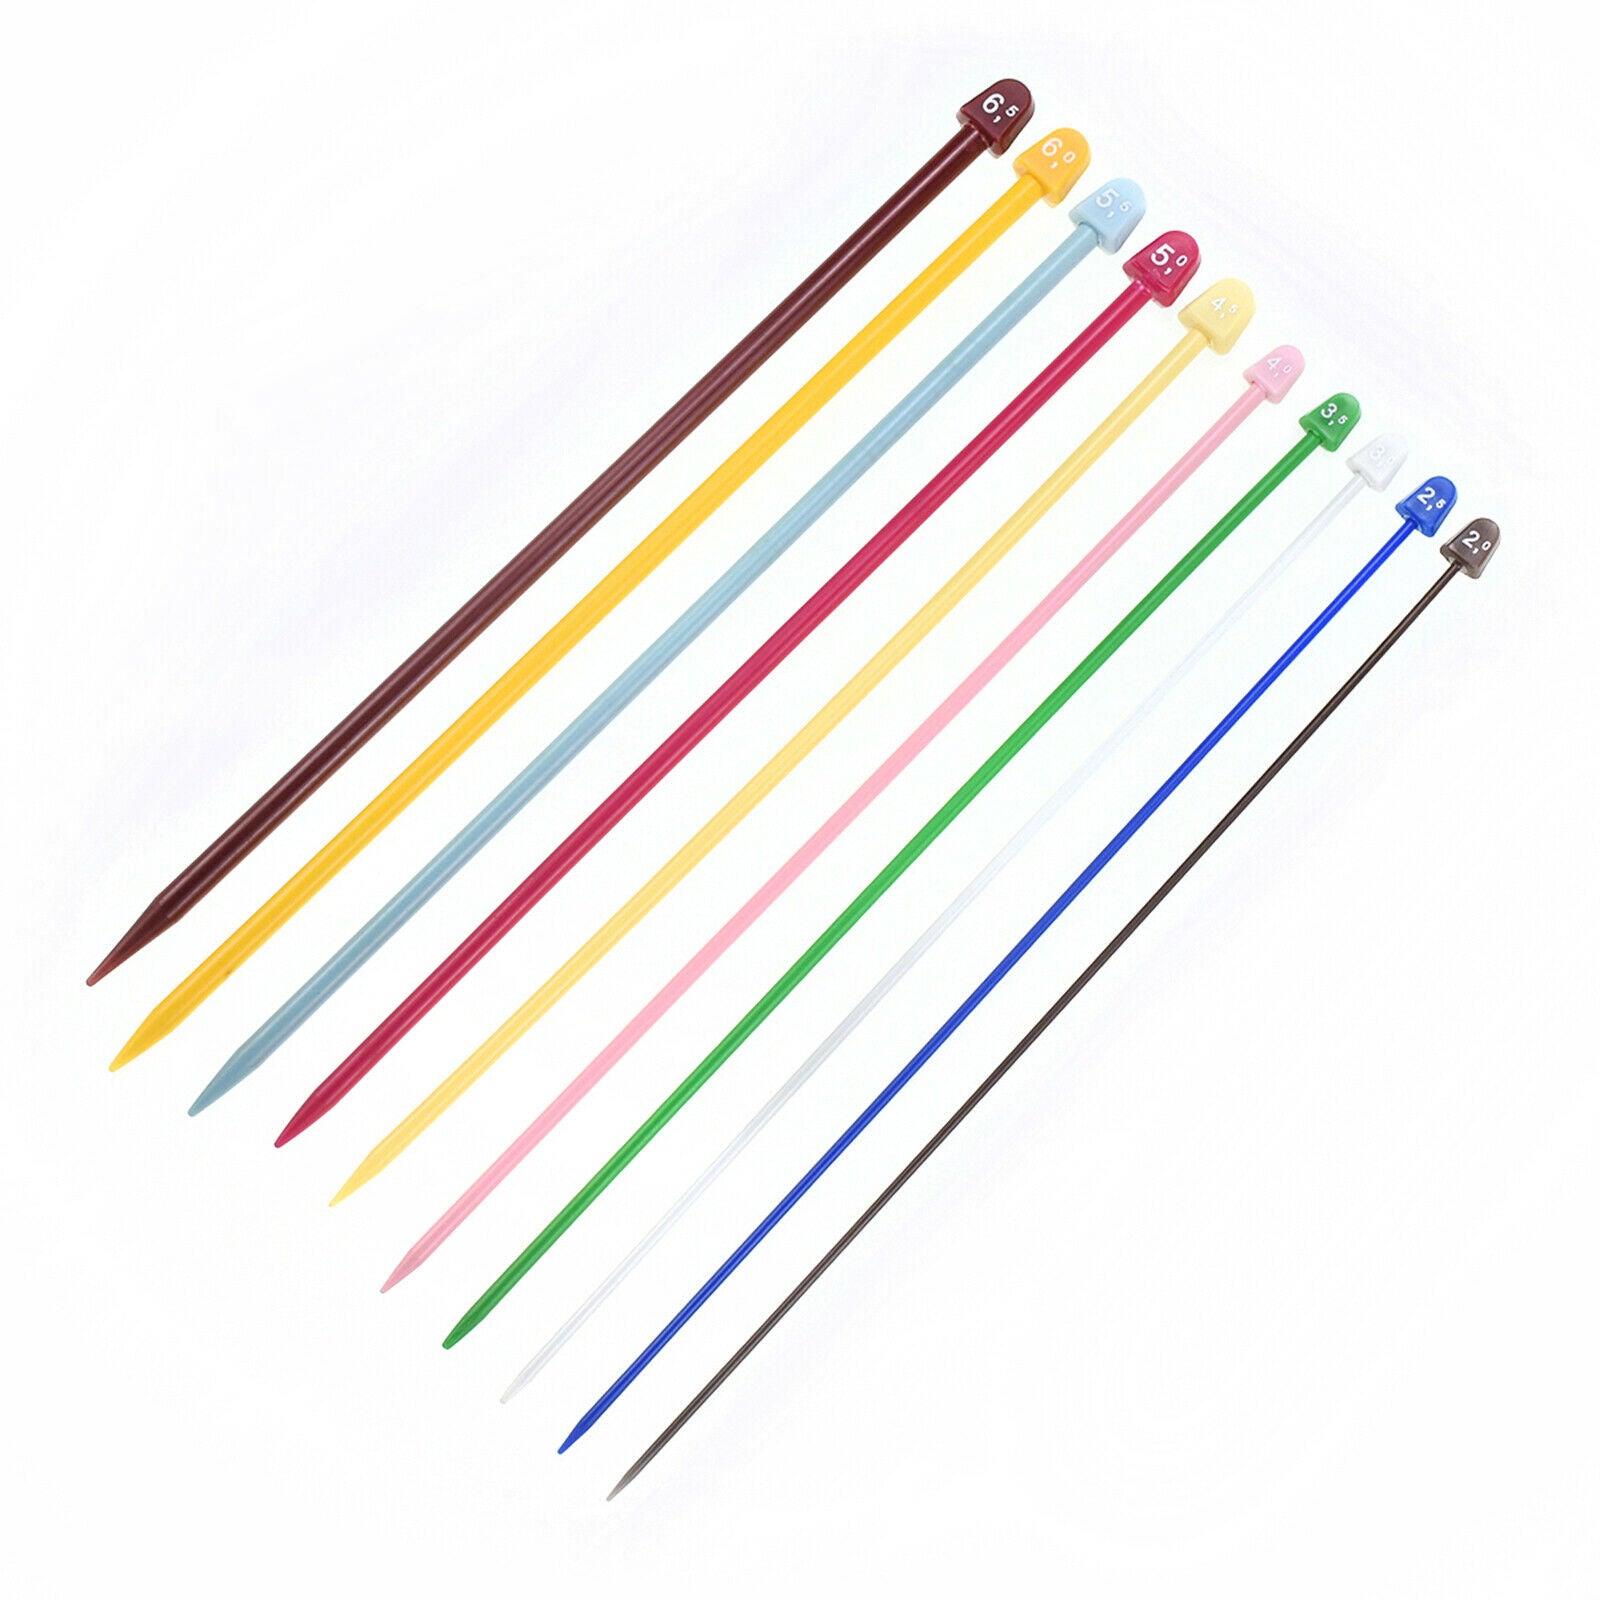 20Pcs Knitting Needles Set Colored Single Pointed Weaving Tool for DIY Hats